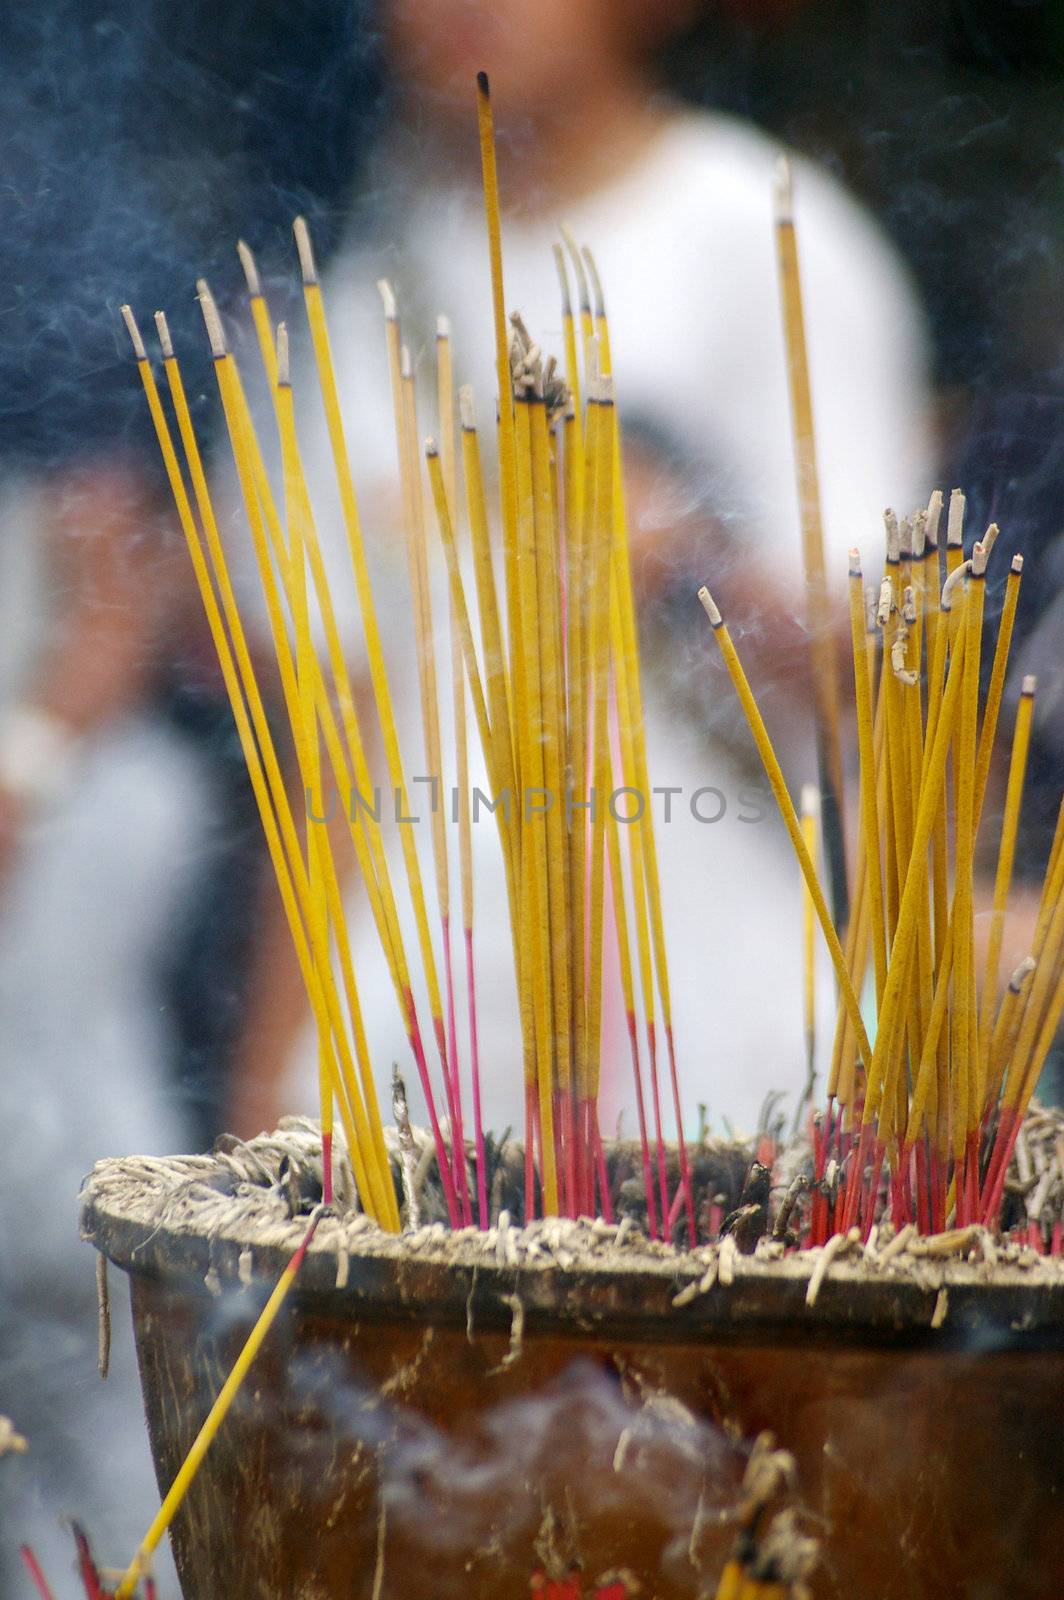 Incenses in a temple by kawing921